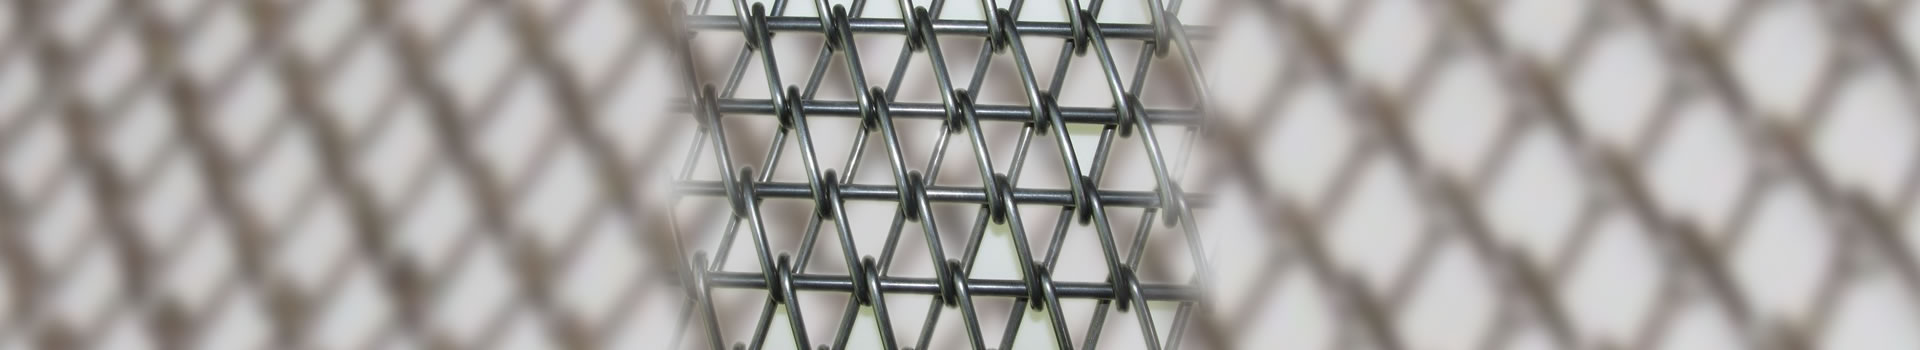 Wire Mesh Belts, Wire Mesh and Rima Filters